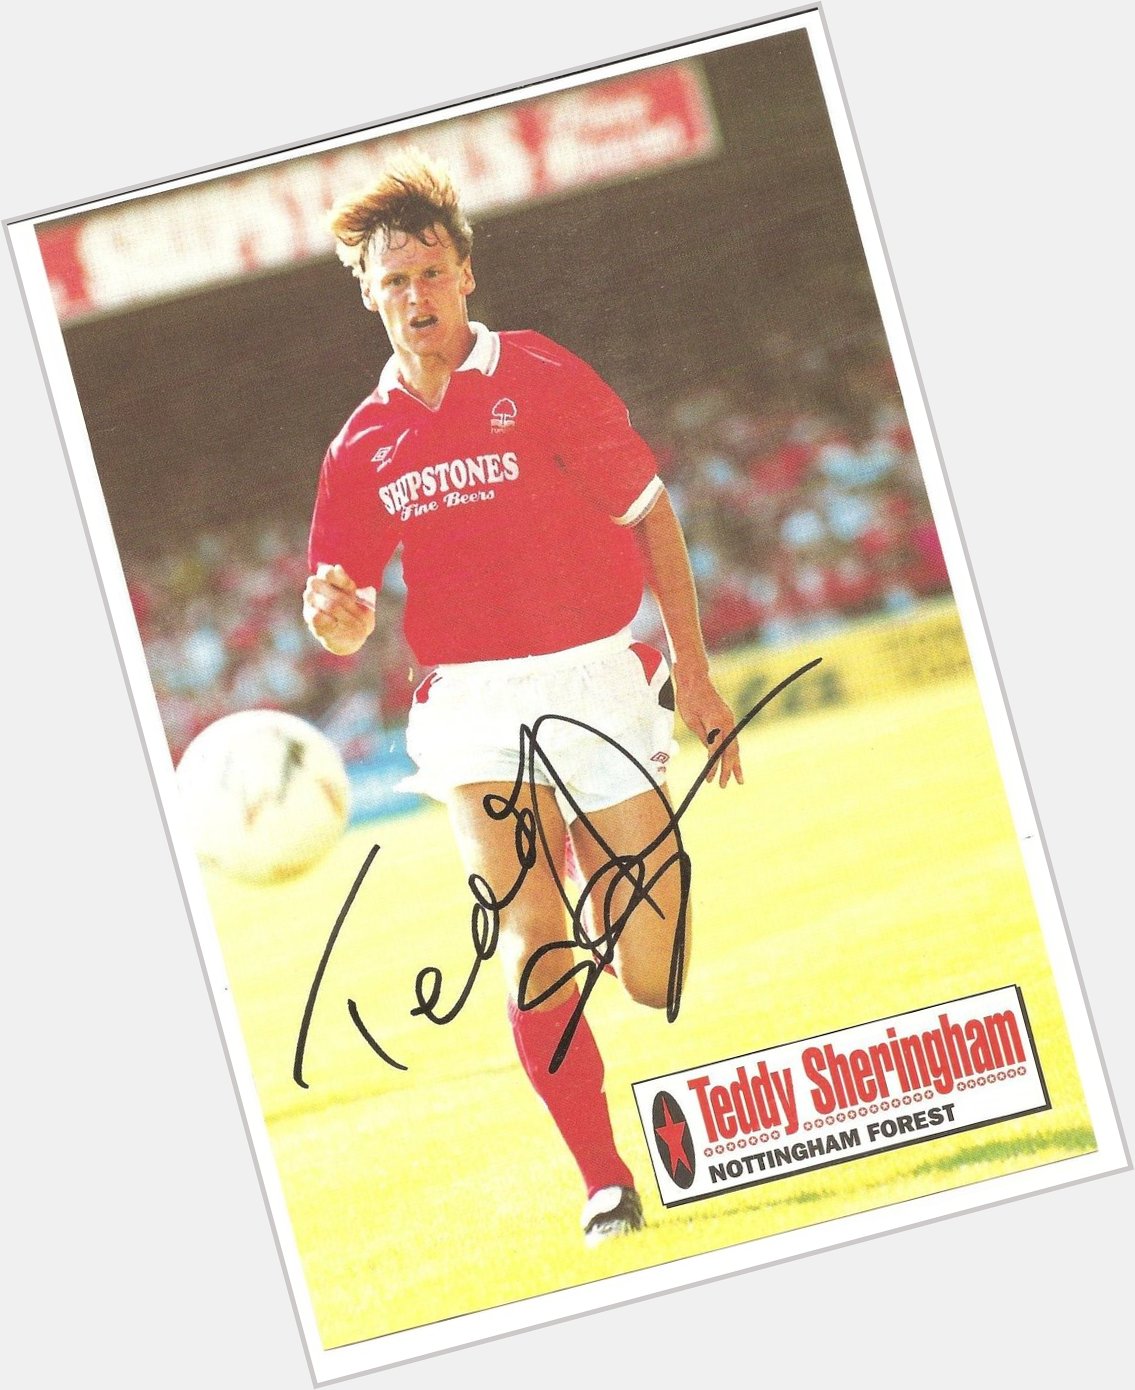 Happy Birthday Teddy Sheringham one of the cleverest footballers to ever pull on a Garibaldi shirt 